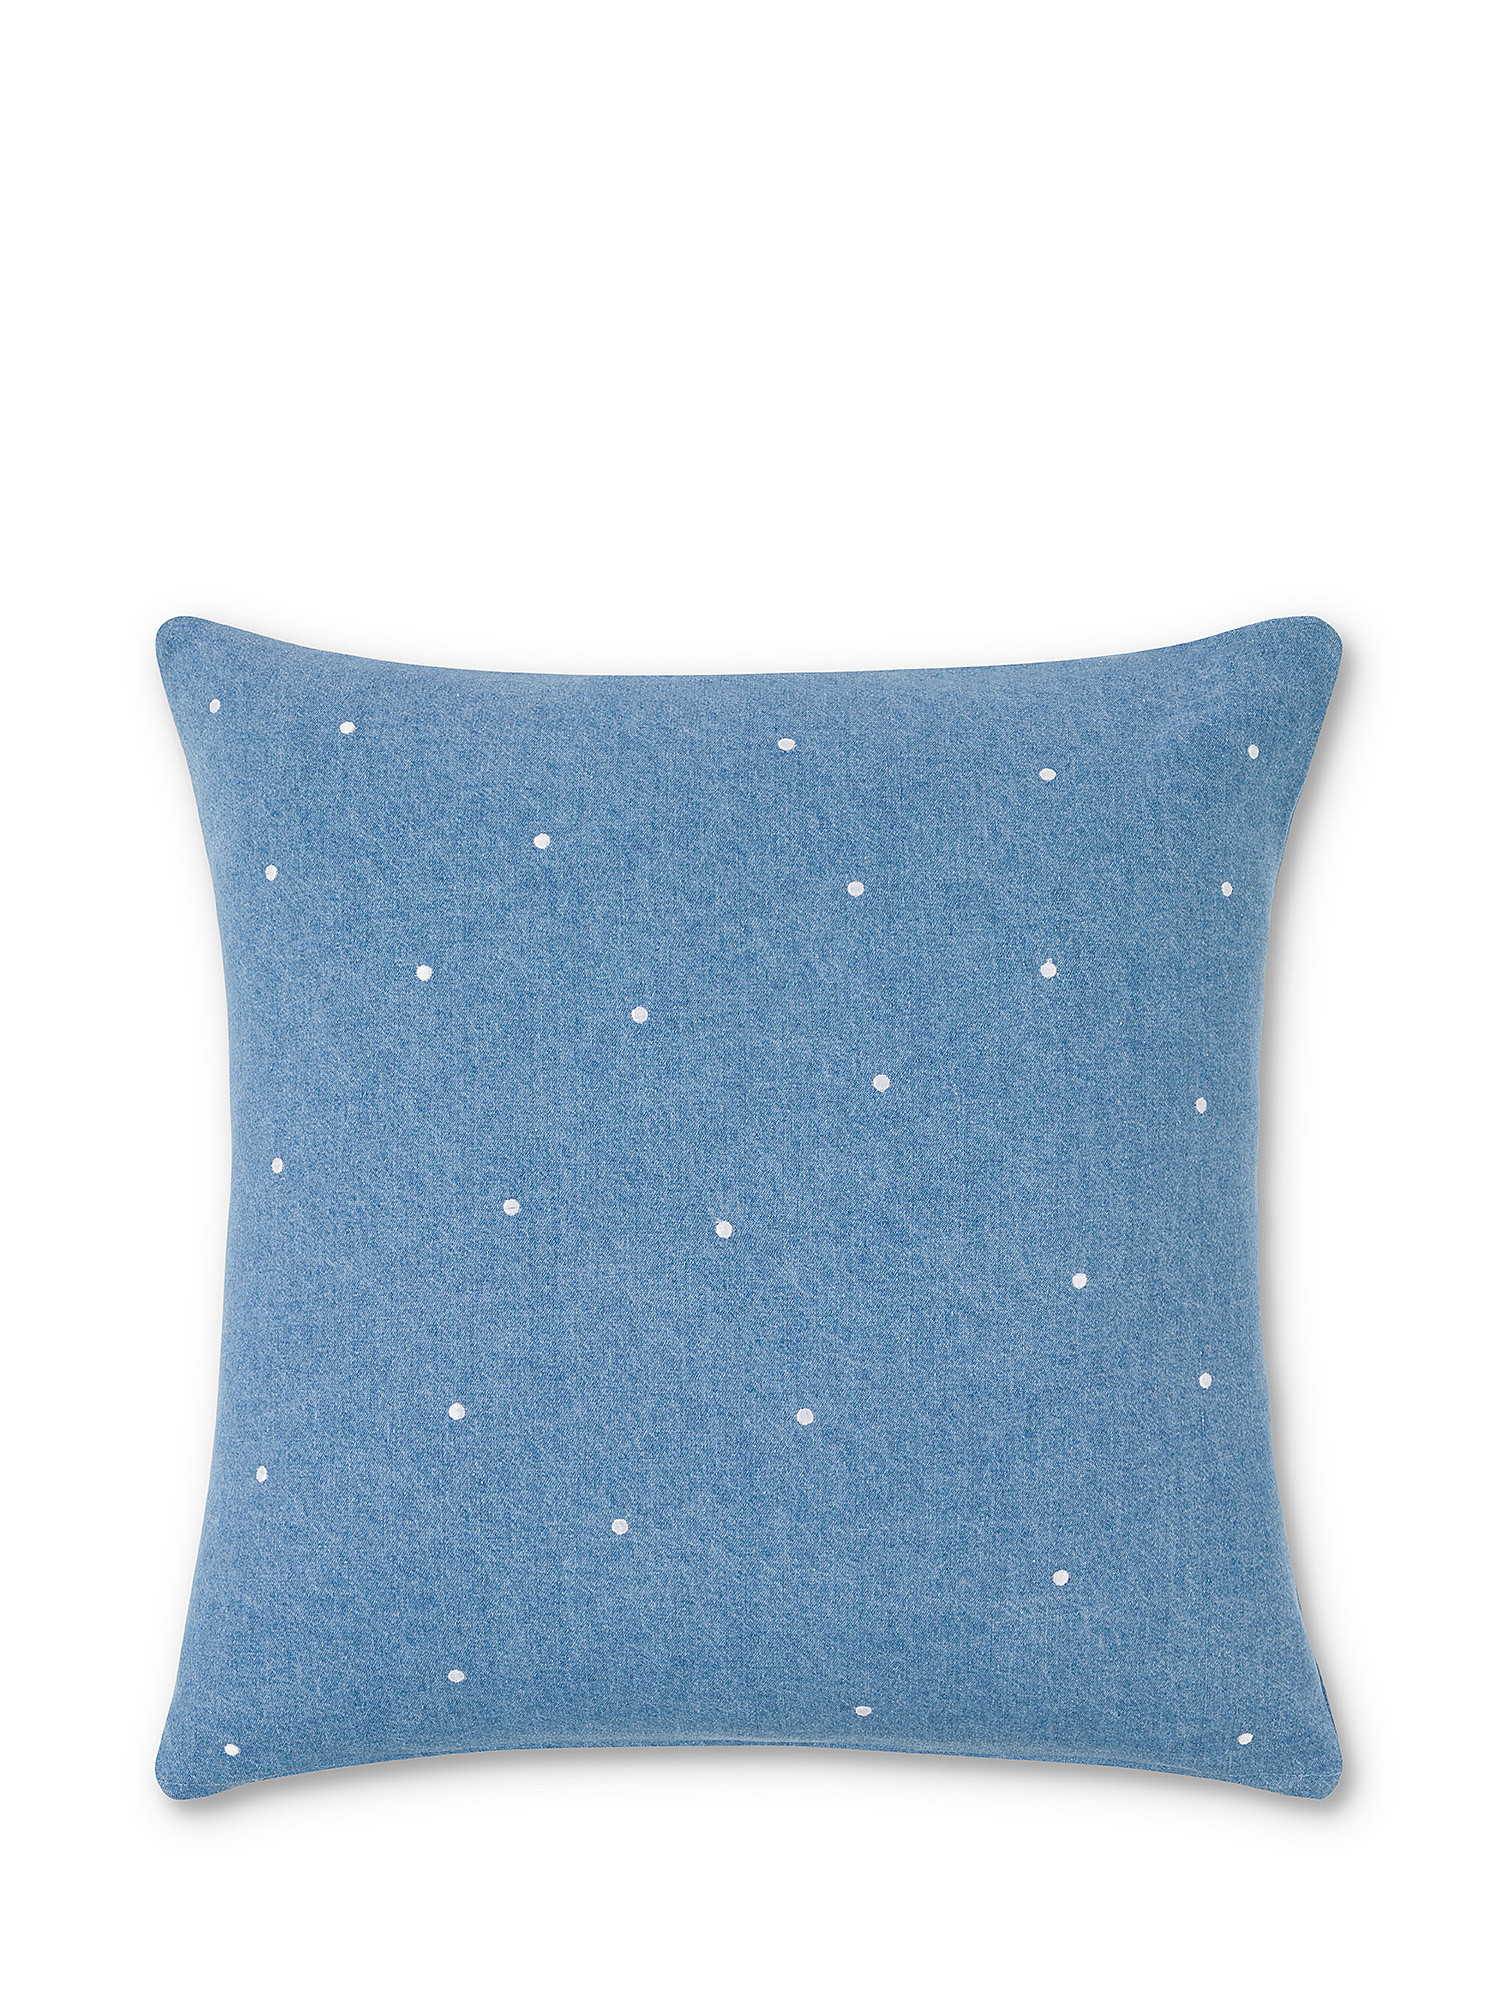 Cotton denim cushion with polka dot embroidery 45x45cm, Light Blue, large image number 0